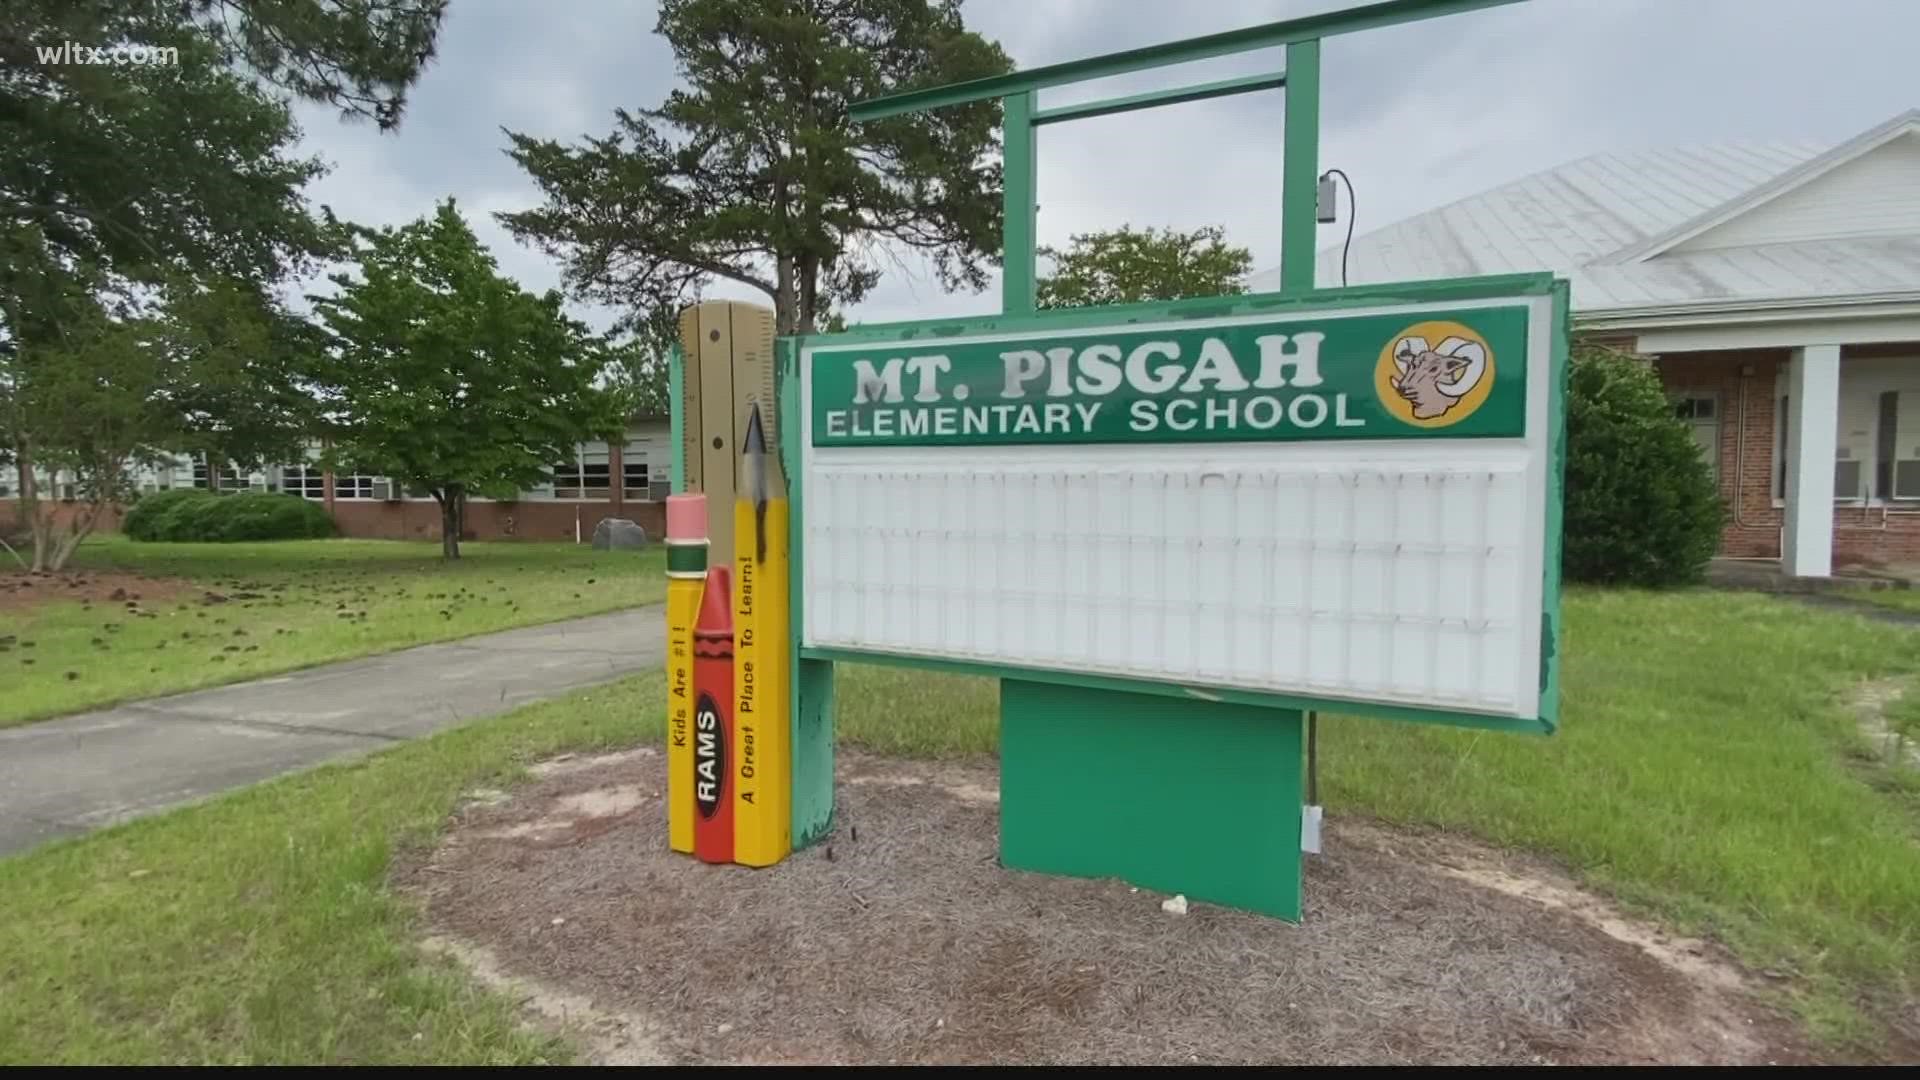 The Old Mt. Pisgah school may perhaps become the new community center if there is money in the Kershaw county coffers.